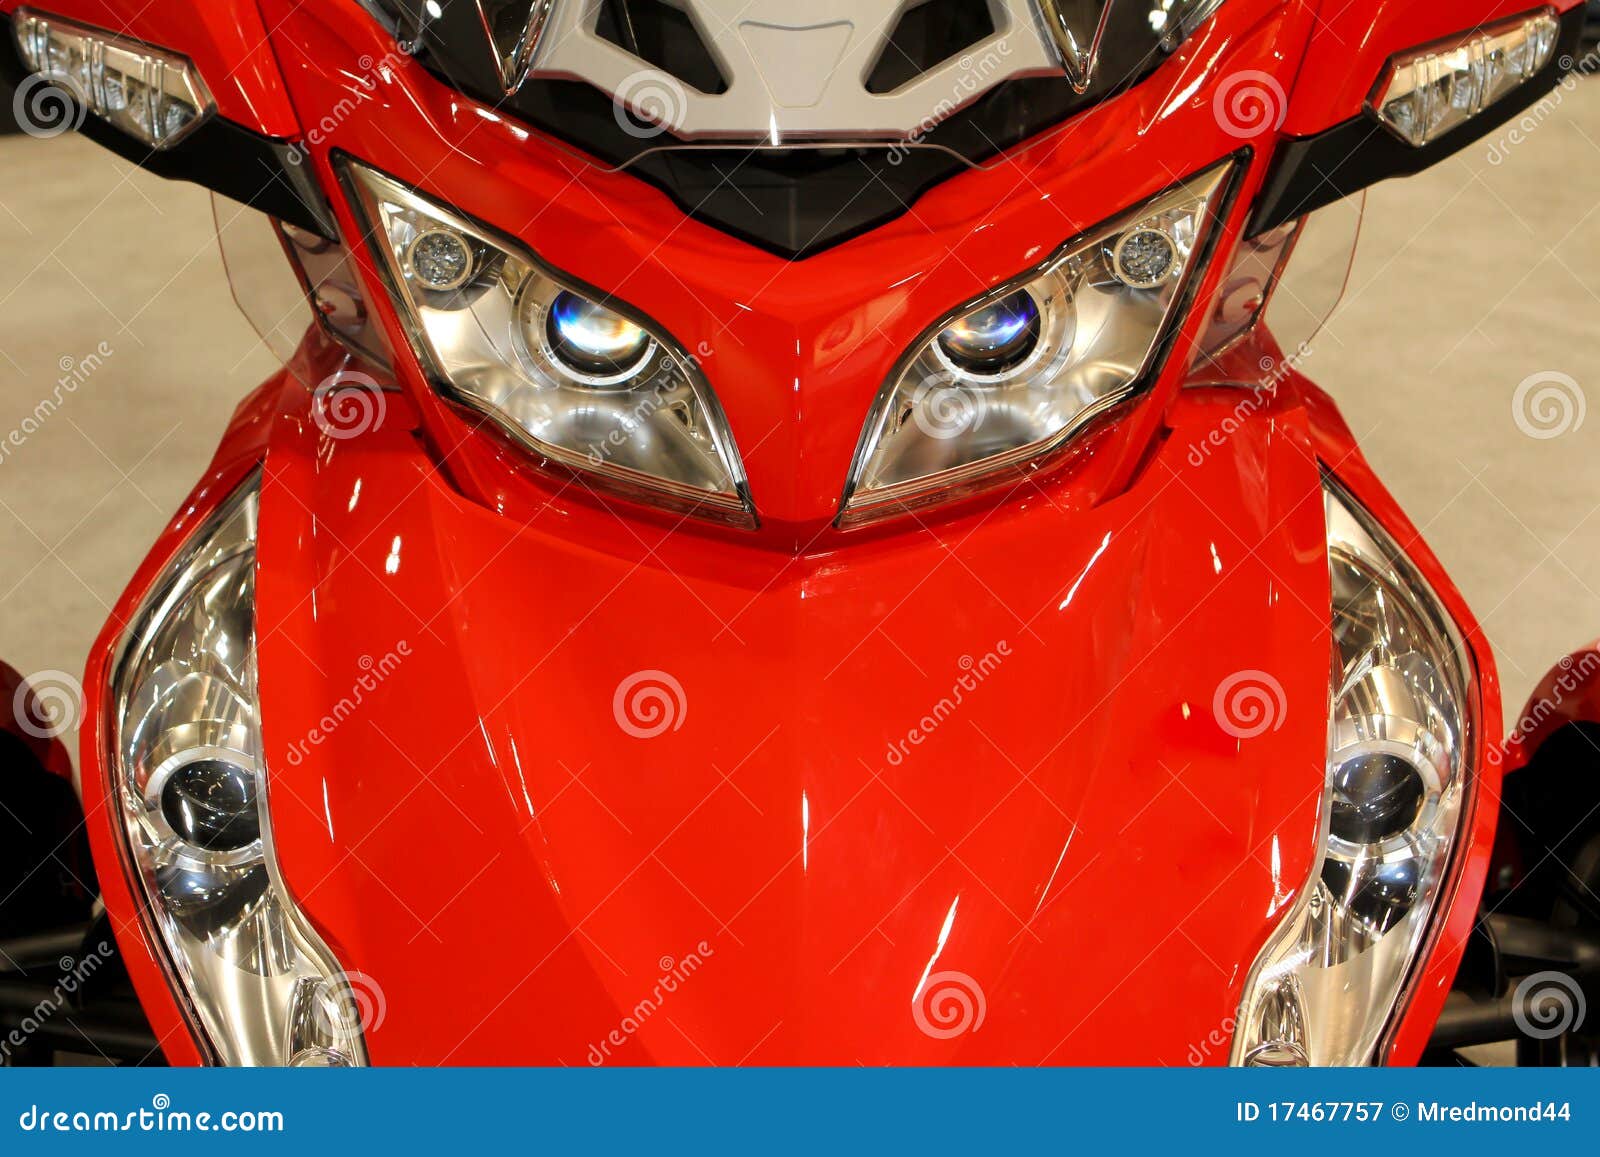 Motorcycle detail stock image. Image of cycle, sport - 17467757